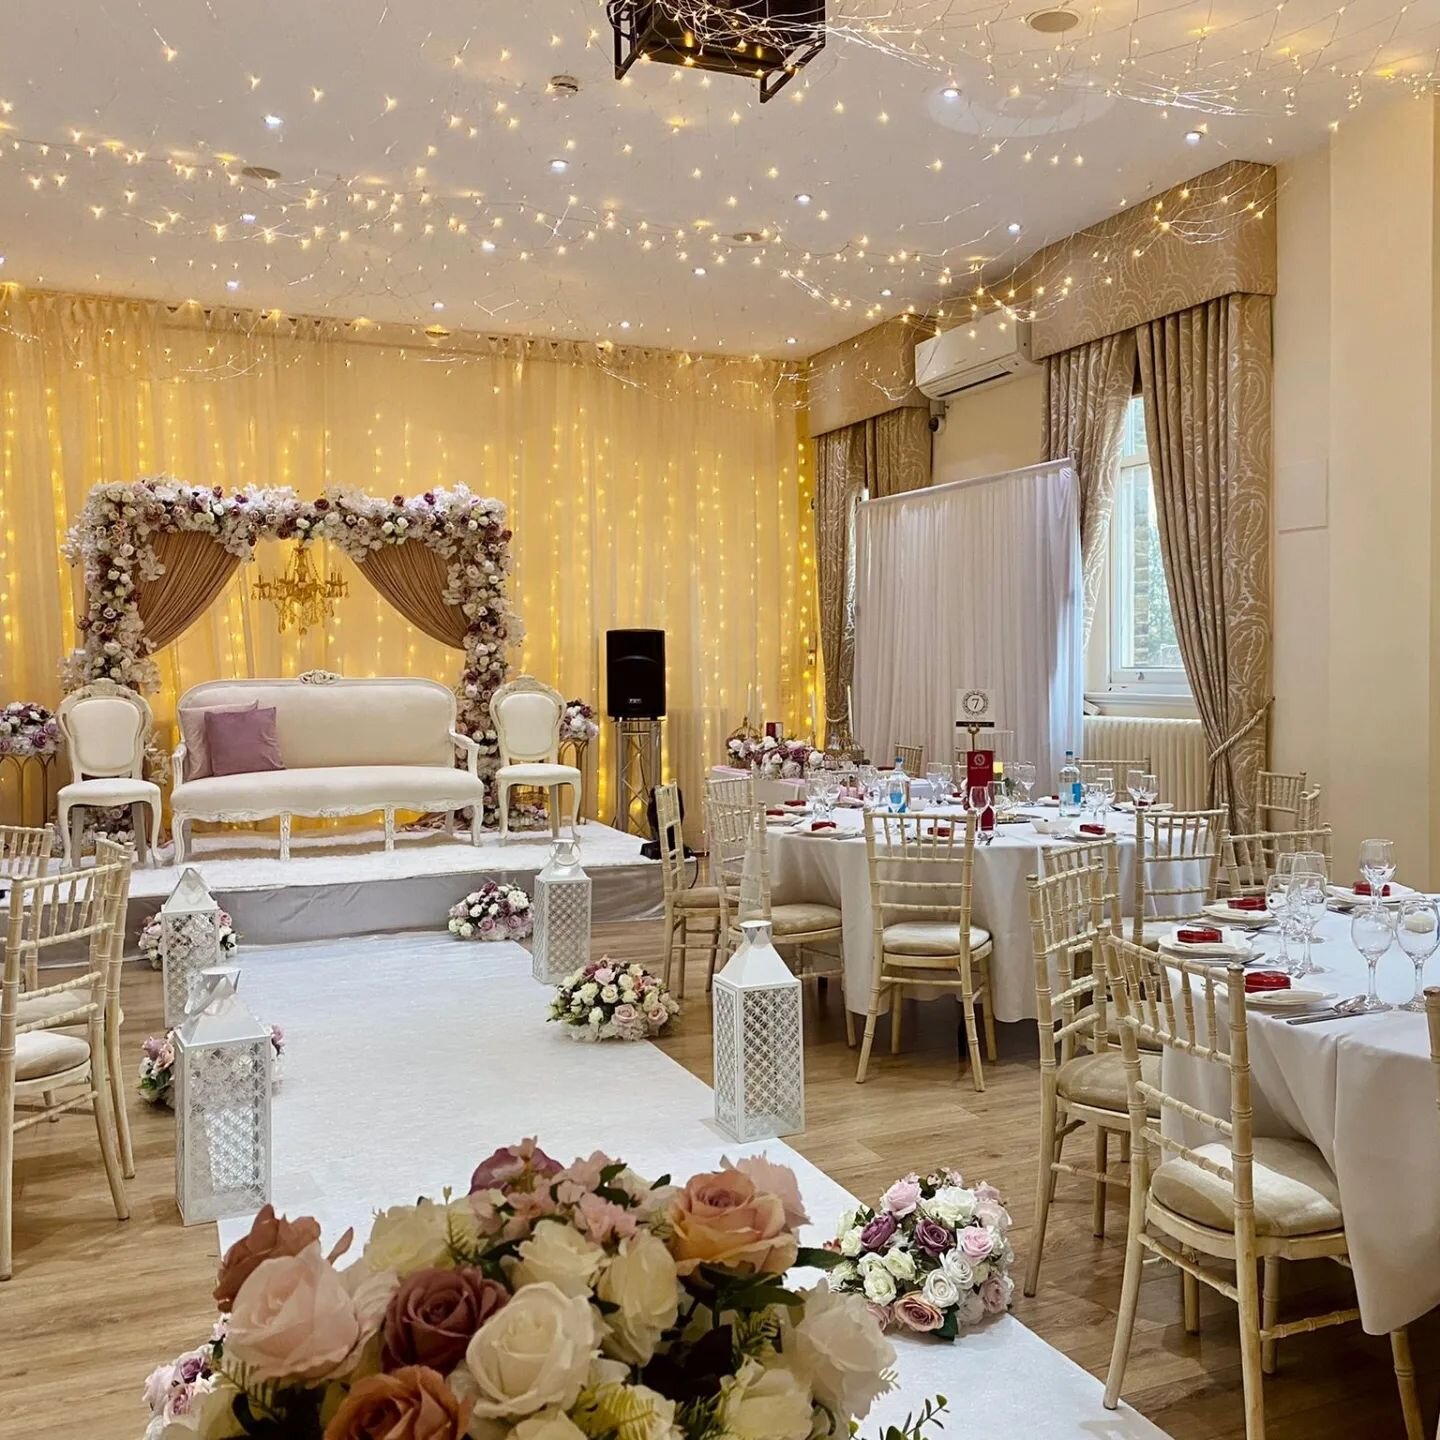 Venue 28 - from Weddings to Birthday Parties, Engagement Parties to Retirement Parties, Christenings to Funeral Wakes, we can accommodate all of life's occasions.
.
Email us at info@venue28.com or drop us a DM for all event enquiries.
.
#venue28 #wed